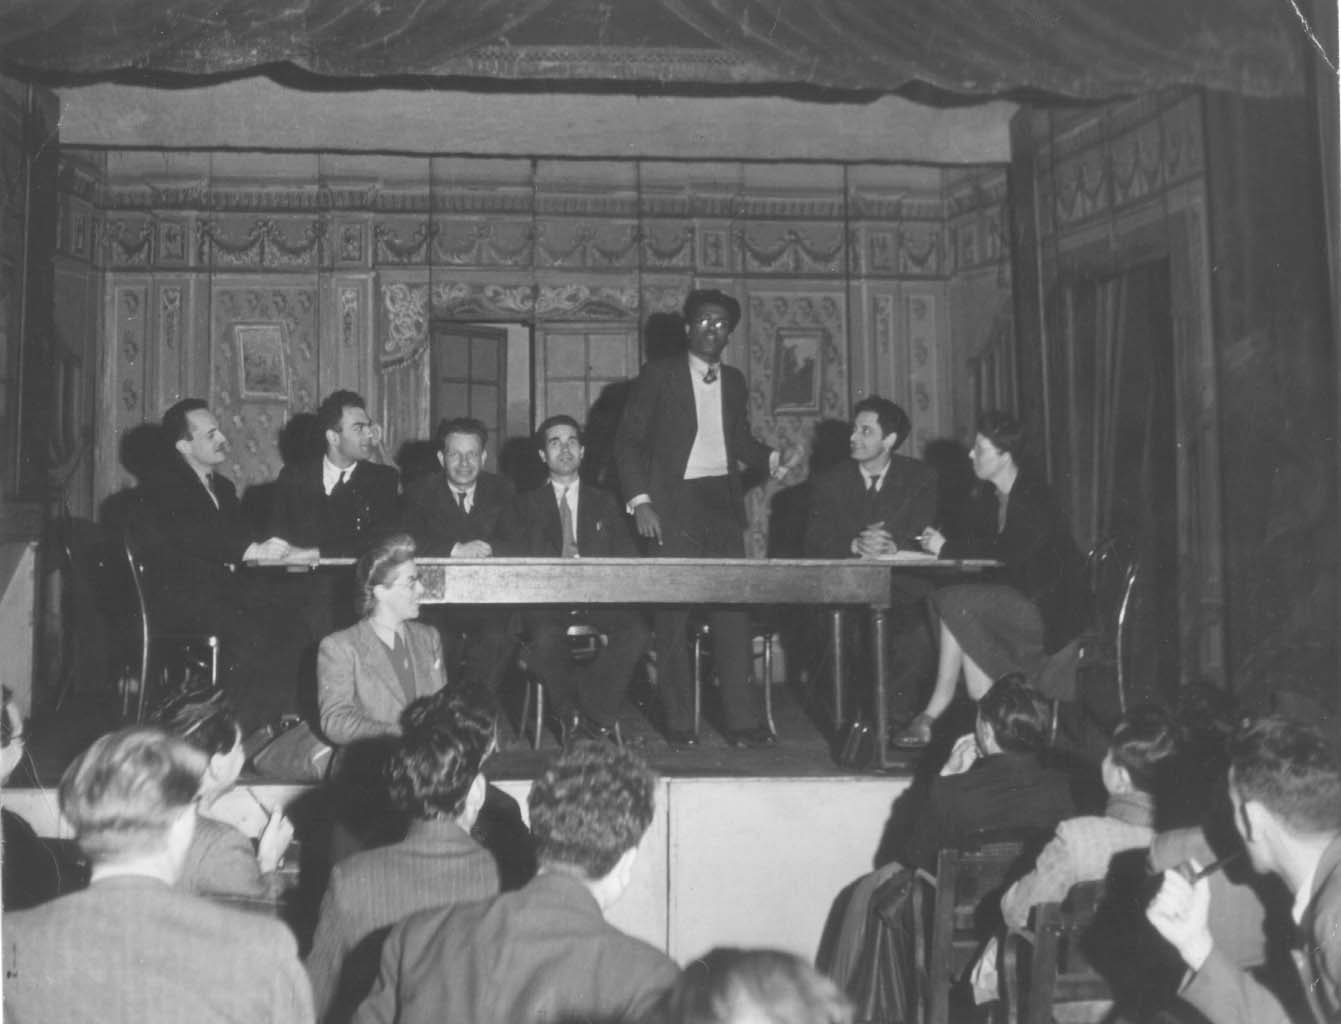 International meeting in Paris, 1946. Colin de Silva speaking. To his right are Jock Haston and Pierre Frank.